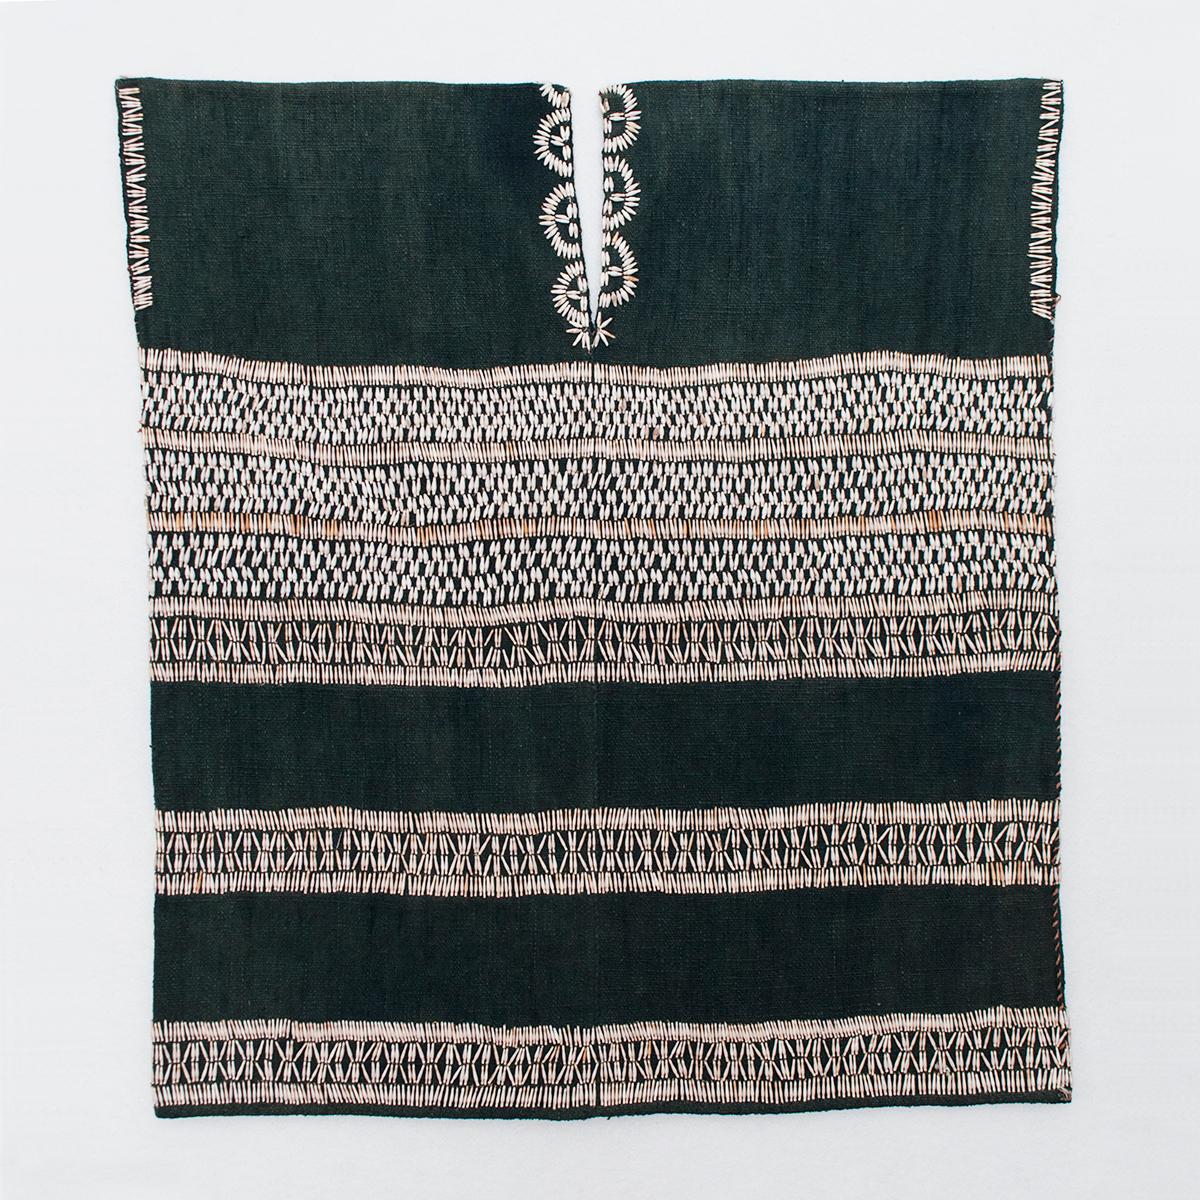 Mid-20th century tribal woman's tunic, Karen People, Burma

A nice, graphic example of a woman's blouse from the Karen ethnic group in Burma/Myanmar. The Job's tears seeds (Coix lacryma-jobi) are in great condition with only one or two missing. The